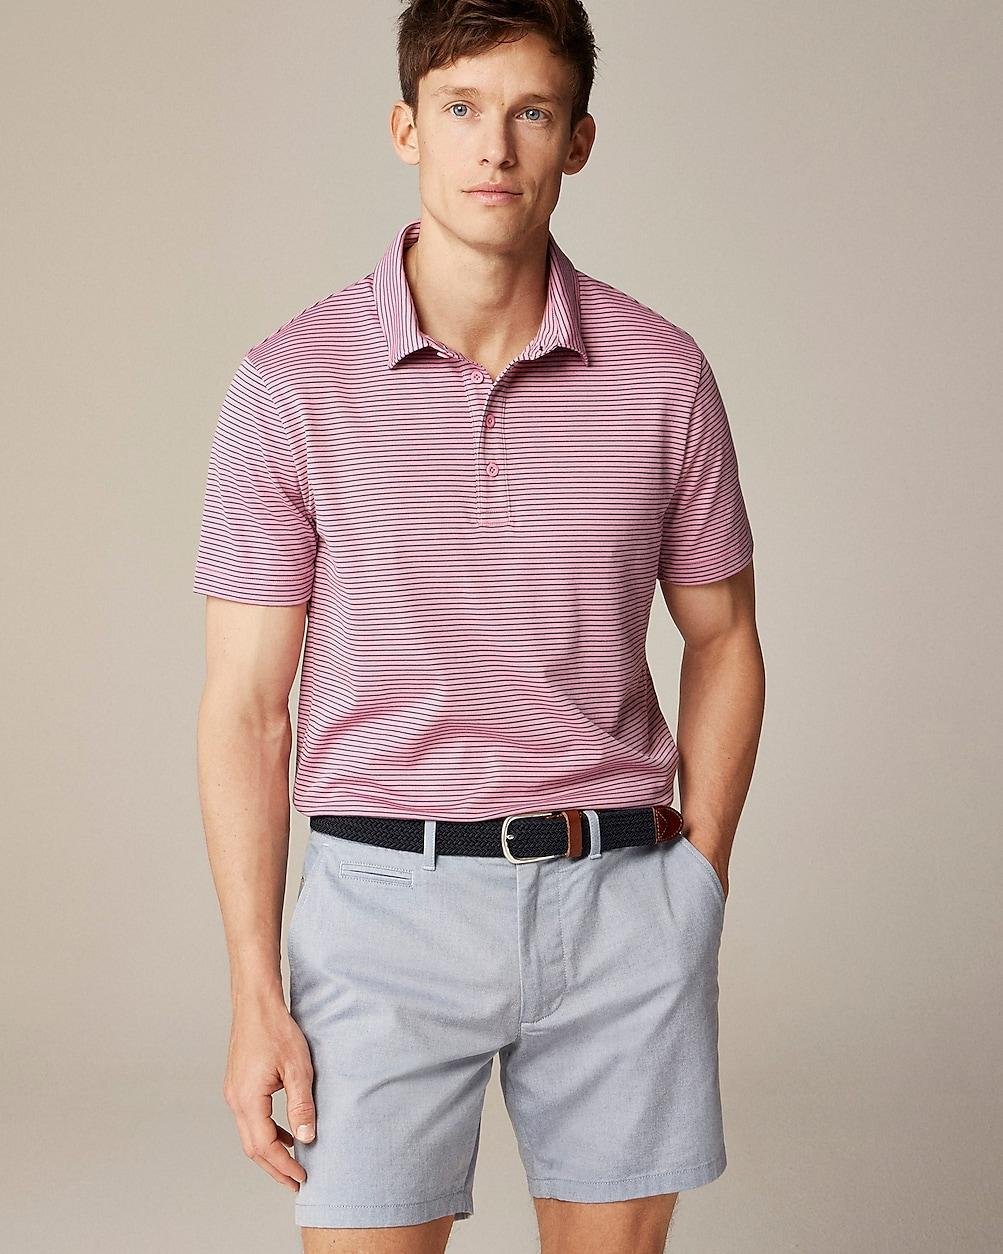 Performance polo shirt with COOLMAX® in stripe by J.CREW